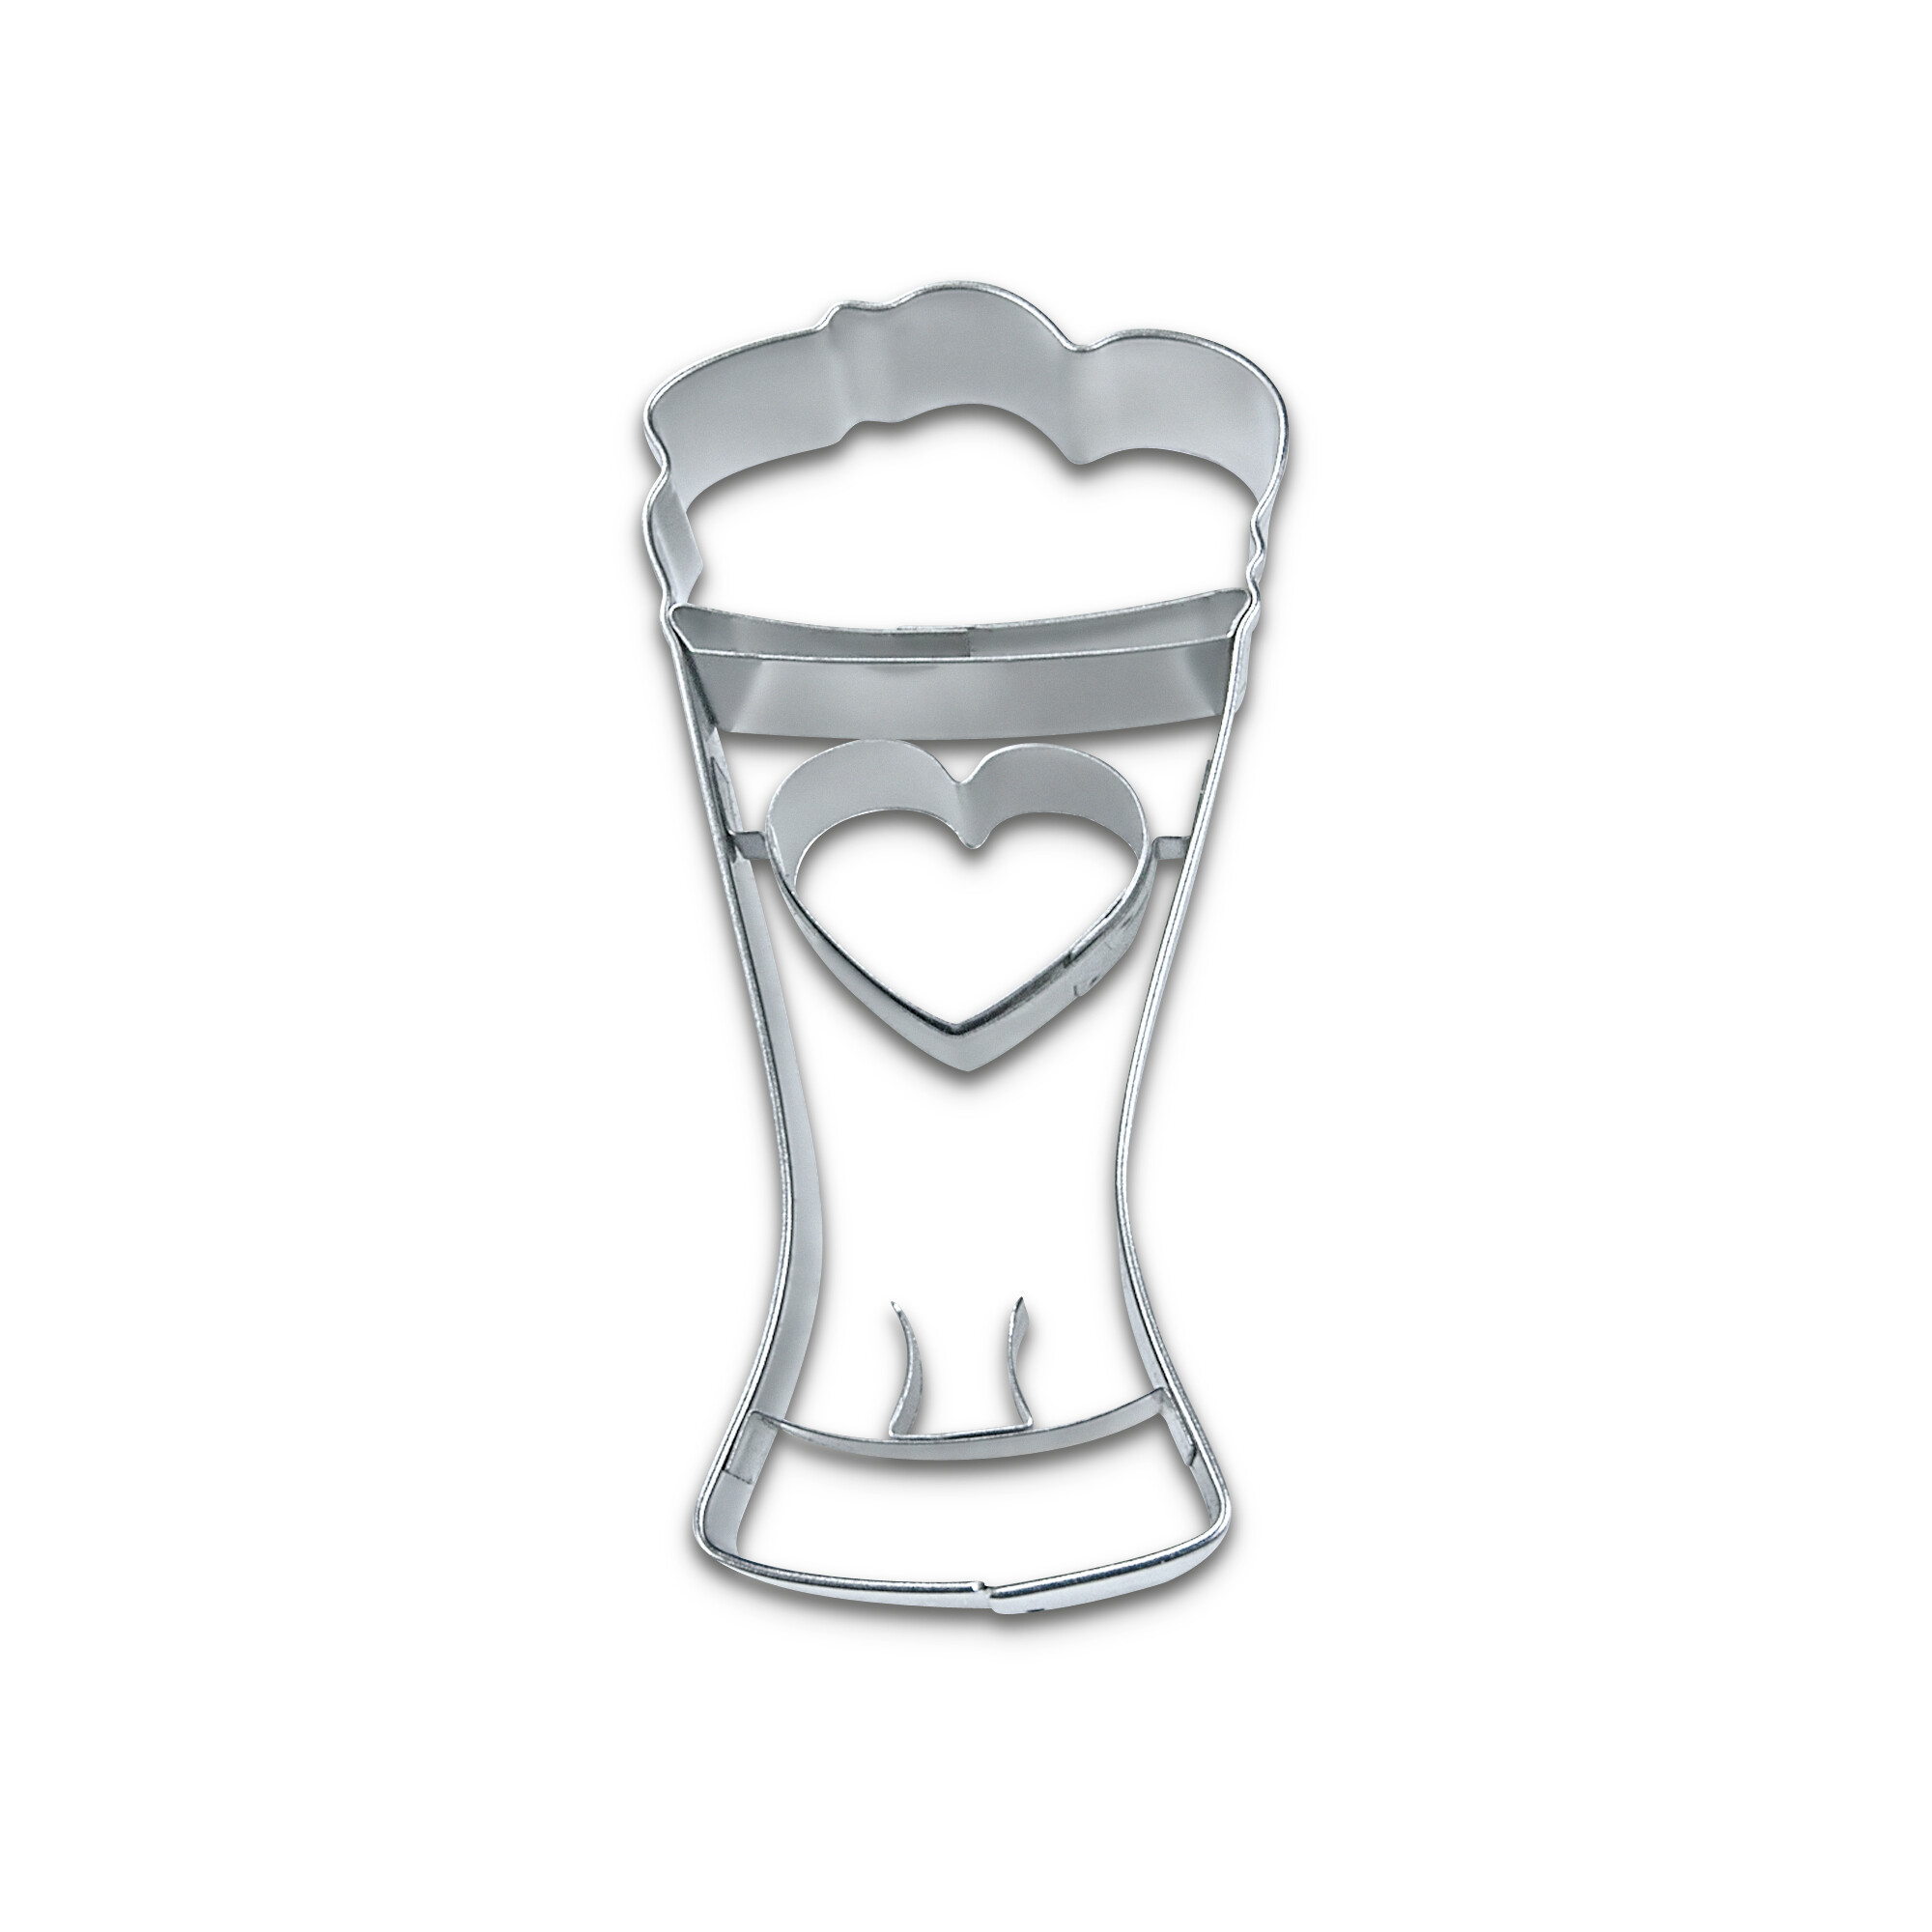 Cookie cutter with stamp – Wheat beer glass